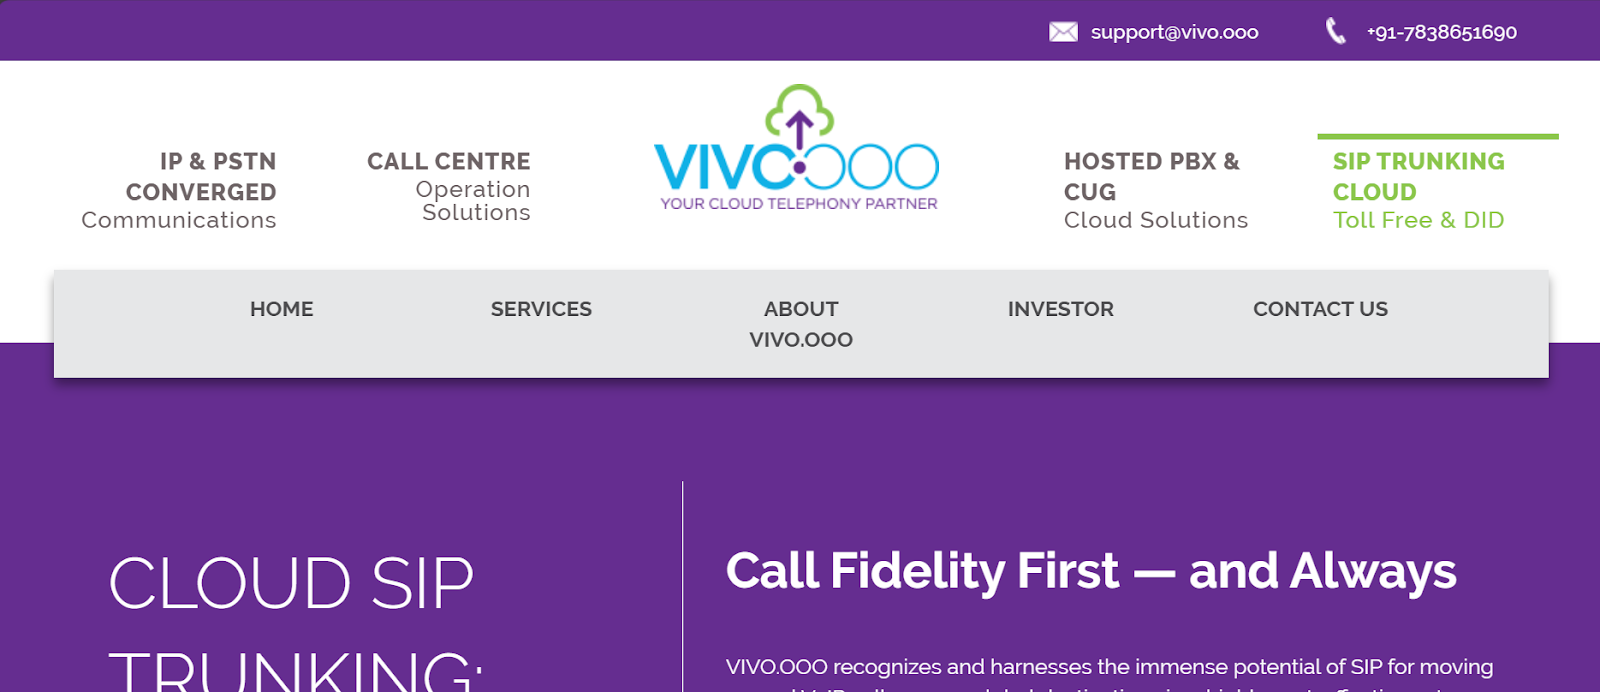 Vivo website snapshot highlighting the services it offers.